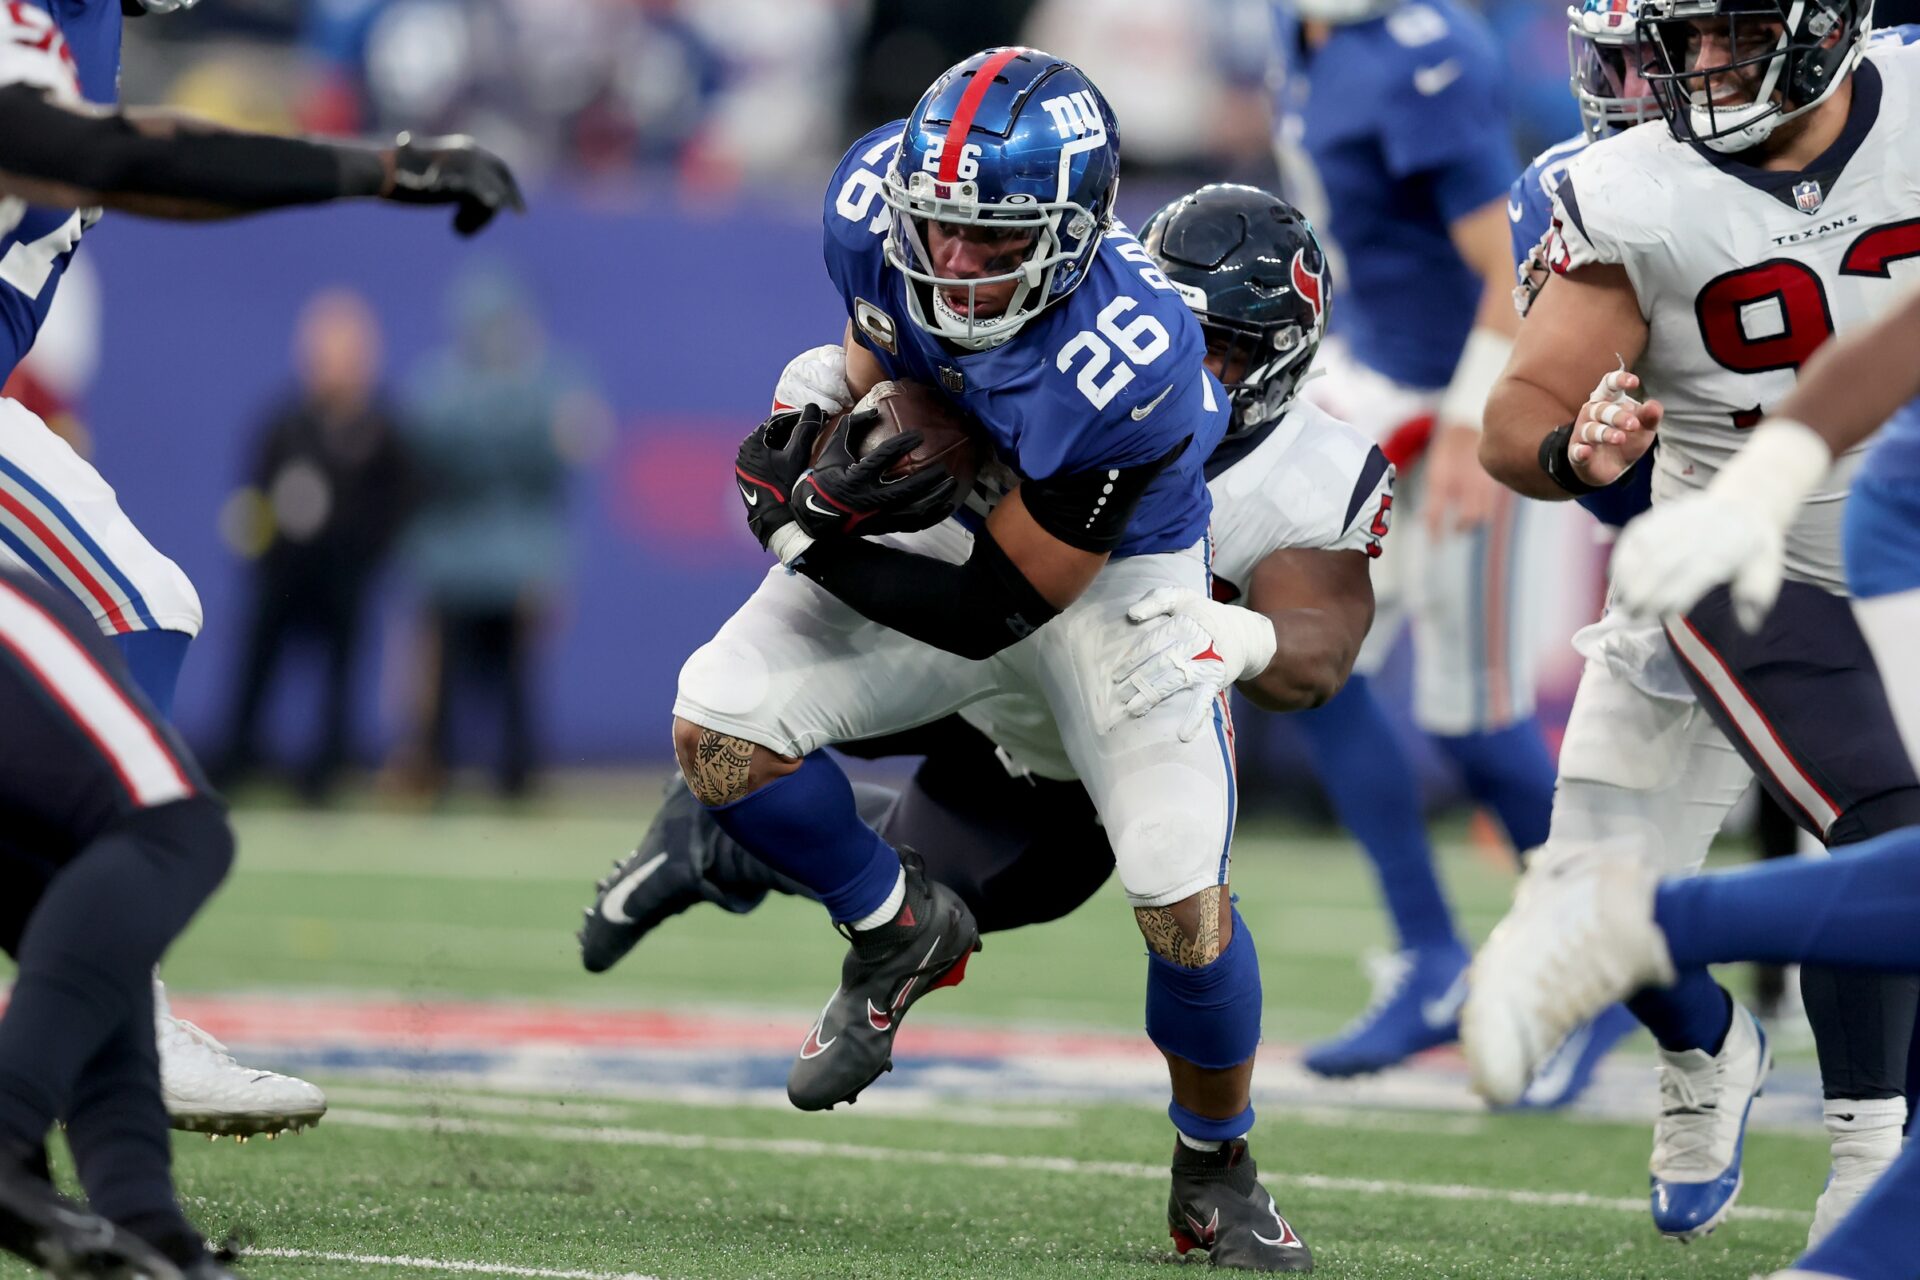 New York Giants RB Saquon Barkley (26) tries to avoid tackles from the Houston Texans' defense.